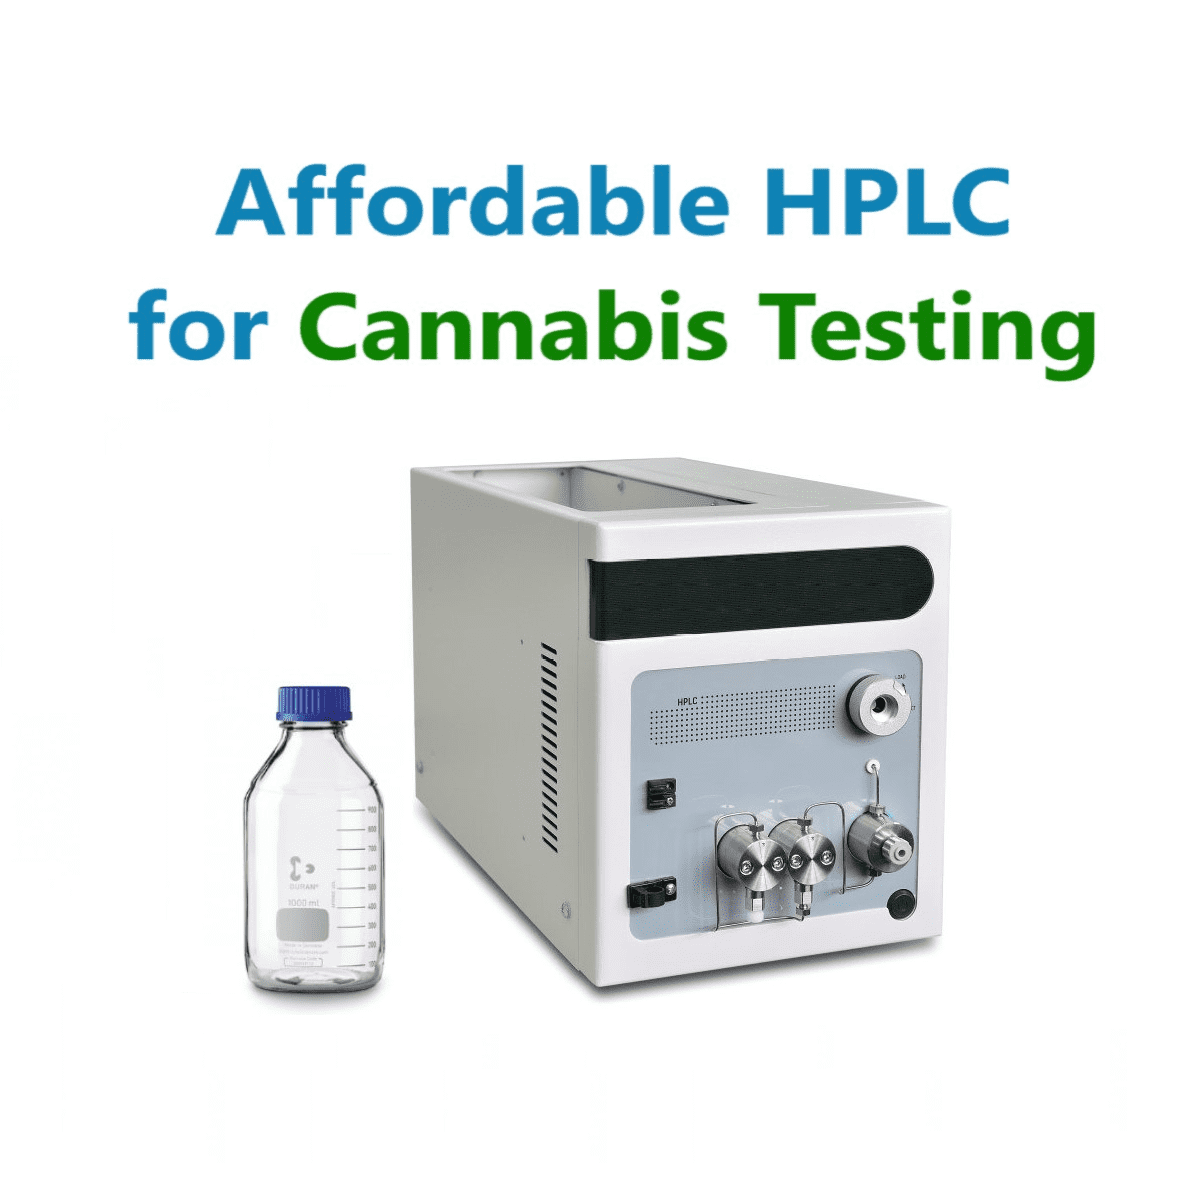 Cannabis HPLC Analyzer NEW with software and reporting system, autosampler available; easy to use, affordable